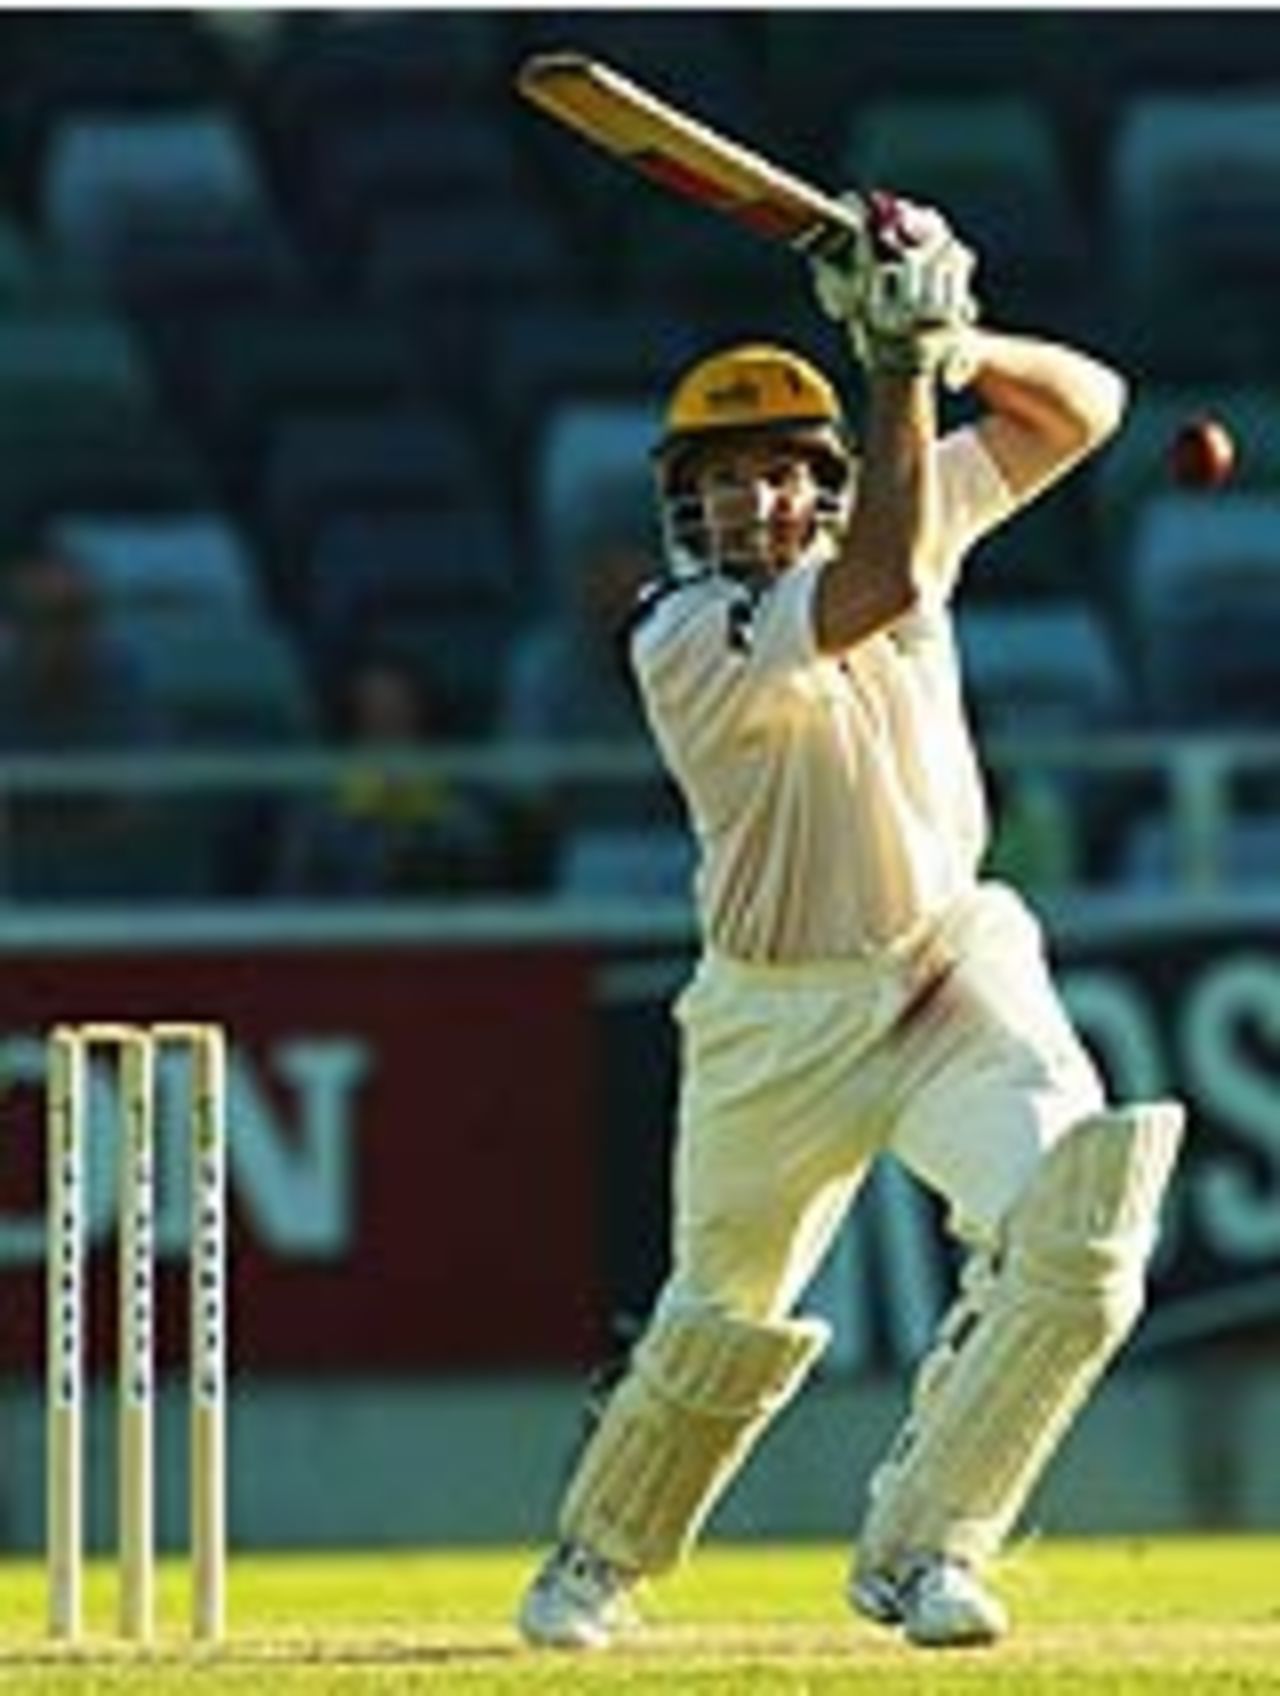 Peter Worthington drives on the way to a 27-ball 45, Western Australia v Zimbabweans, Tour match, 3rd day, Perth, October 5, 2003